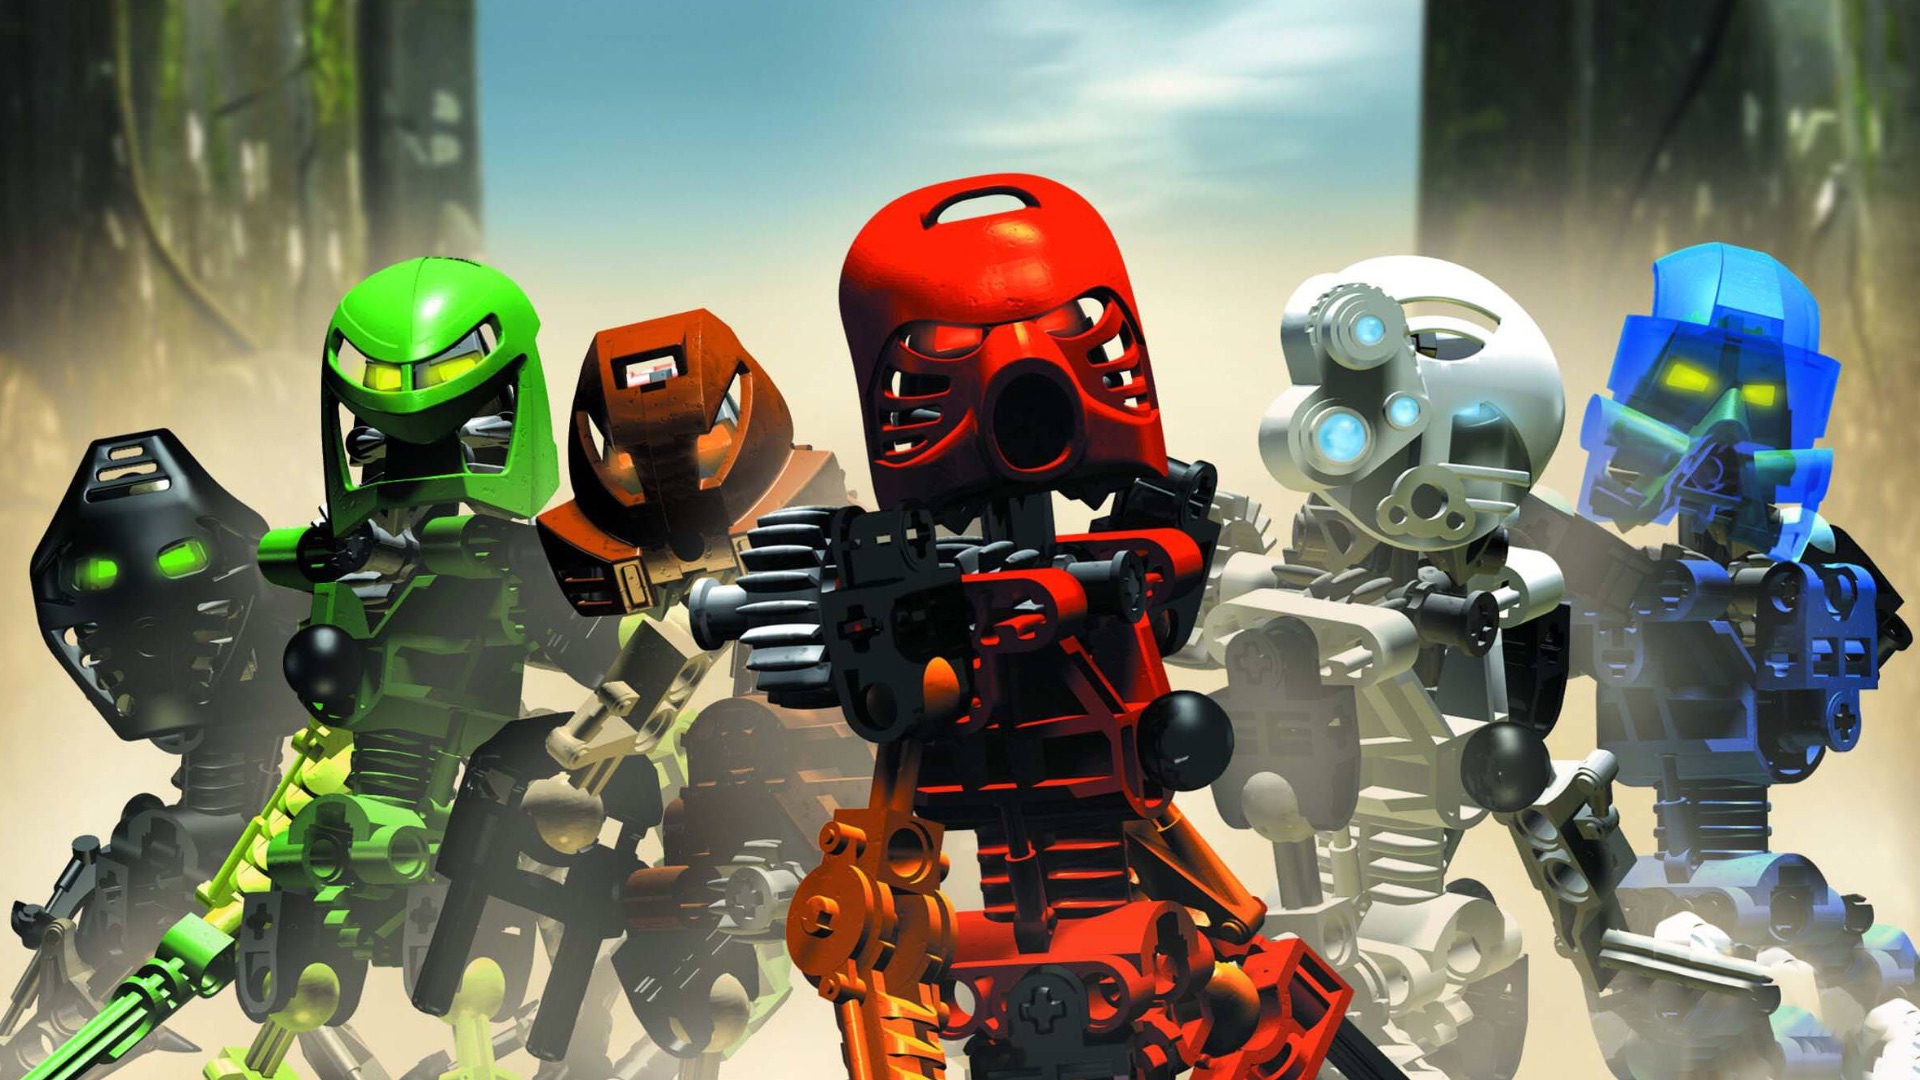 Products LEGO Bionicle 1920x1080